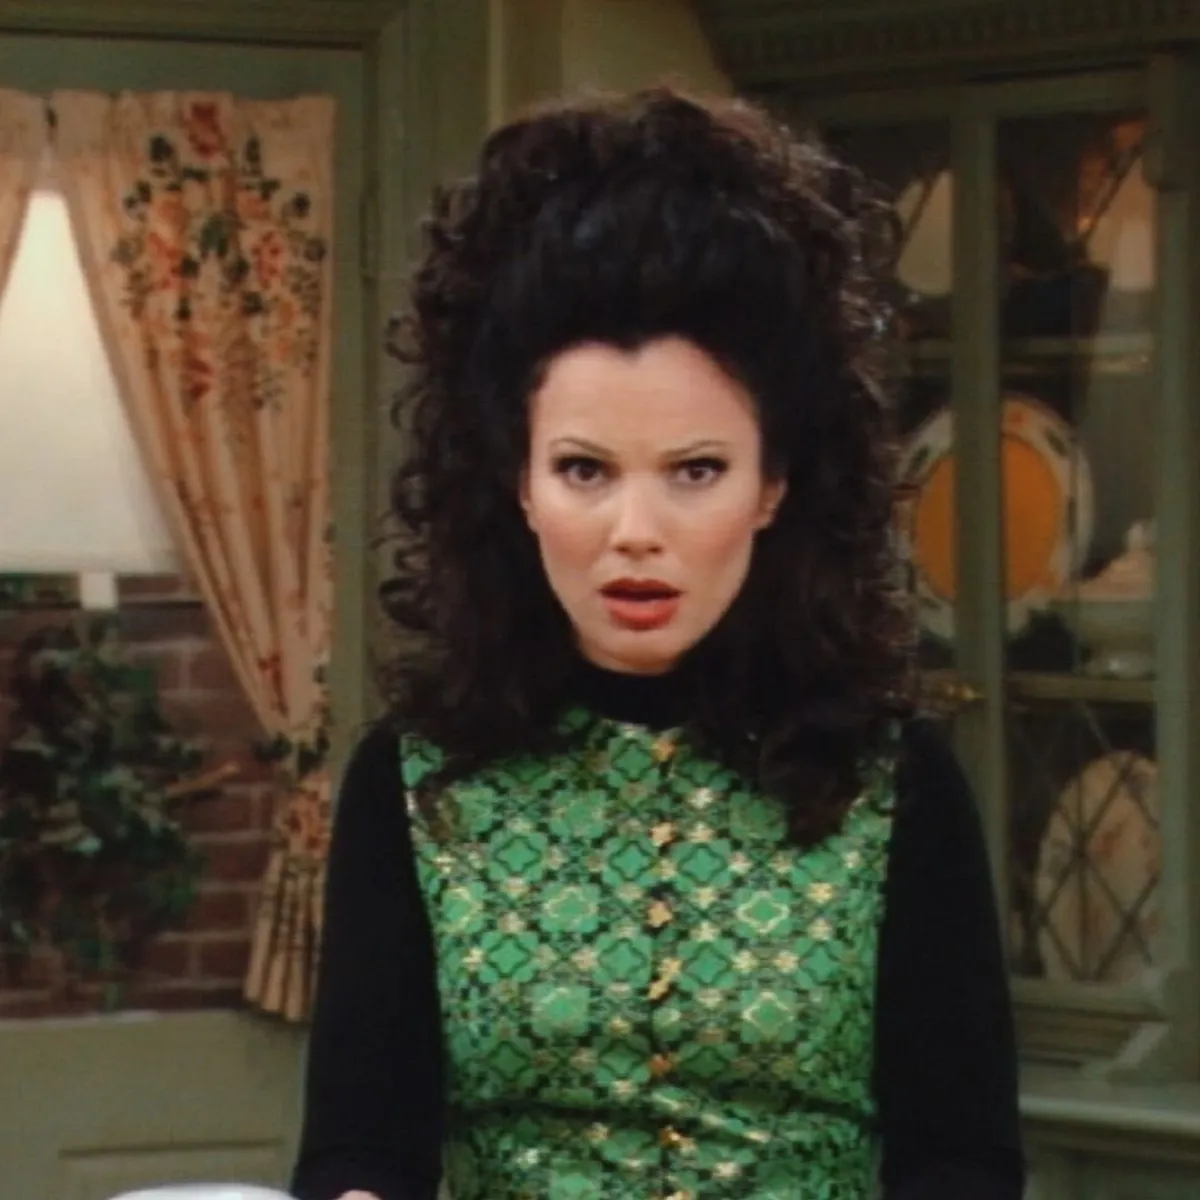 Image of Fran Drescher as Fran Fine in the CBS sitcom, 'The Nanny.' She is standing in the house looking right into the camera with a shocked expression on her face. Fran is a white, Jewish woman with long, curly, black hair worn half up in a ponytail and half down. She's wearing a green patterned top over a long-sleeved black shirt.